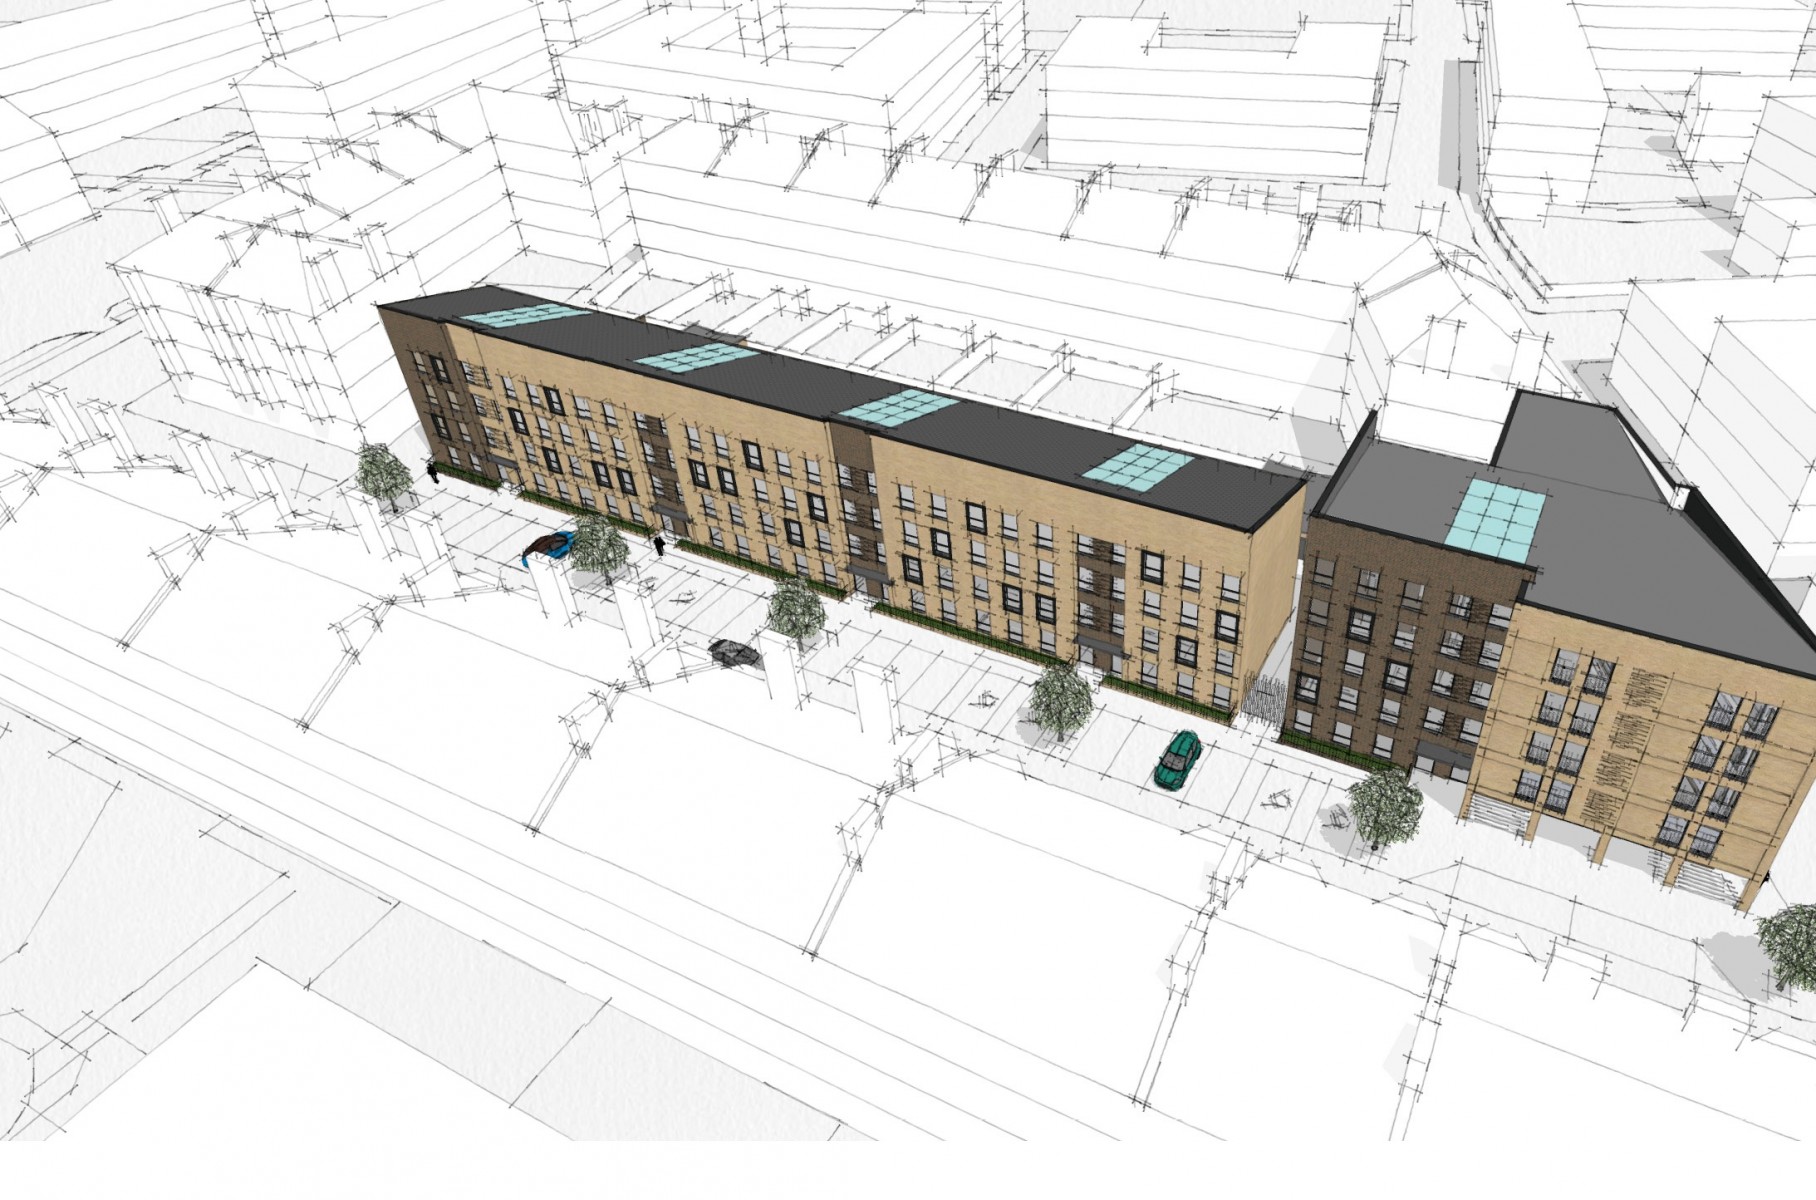 Southside Housing Association submits car-free flats plan